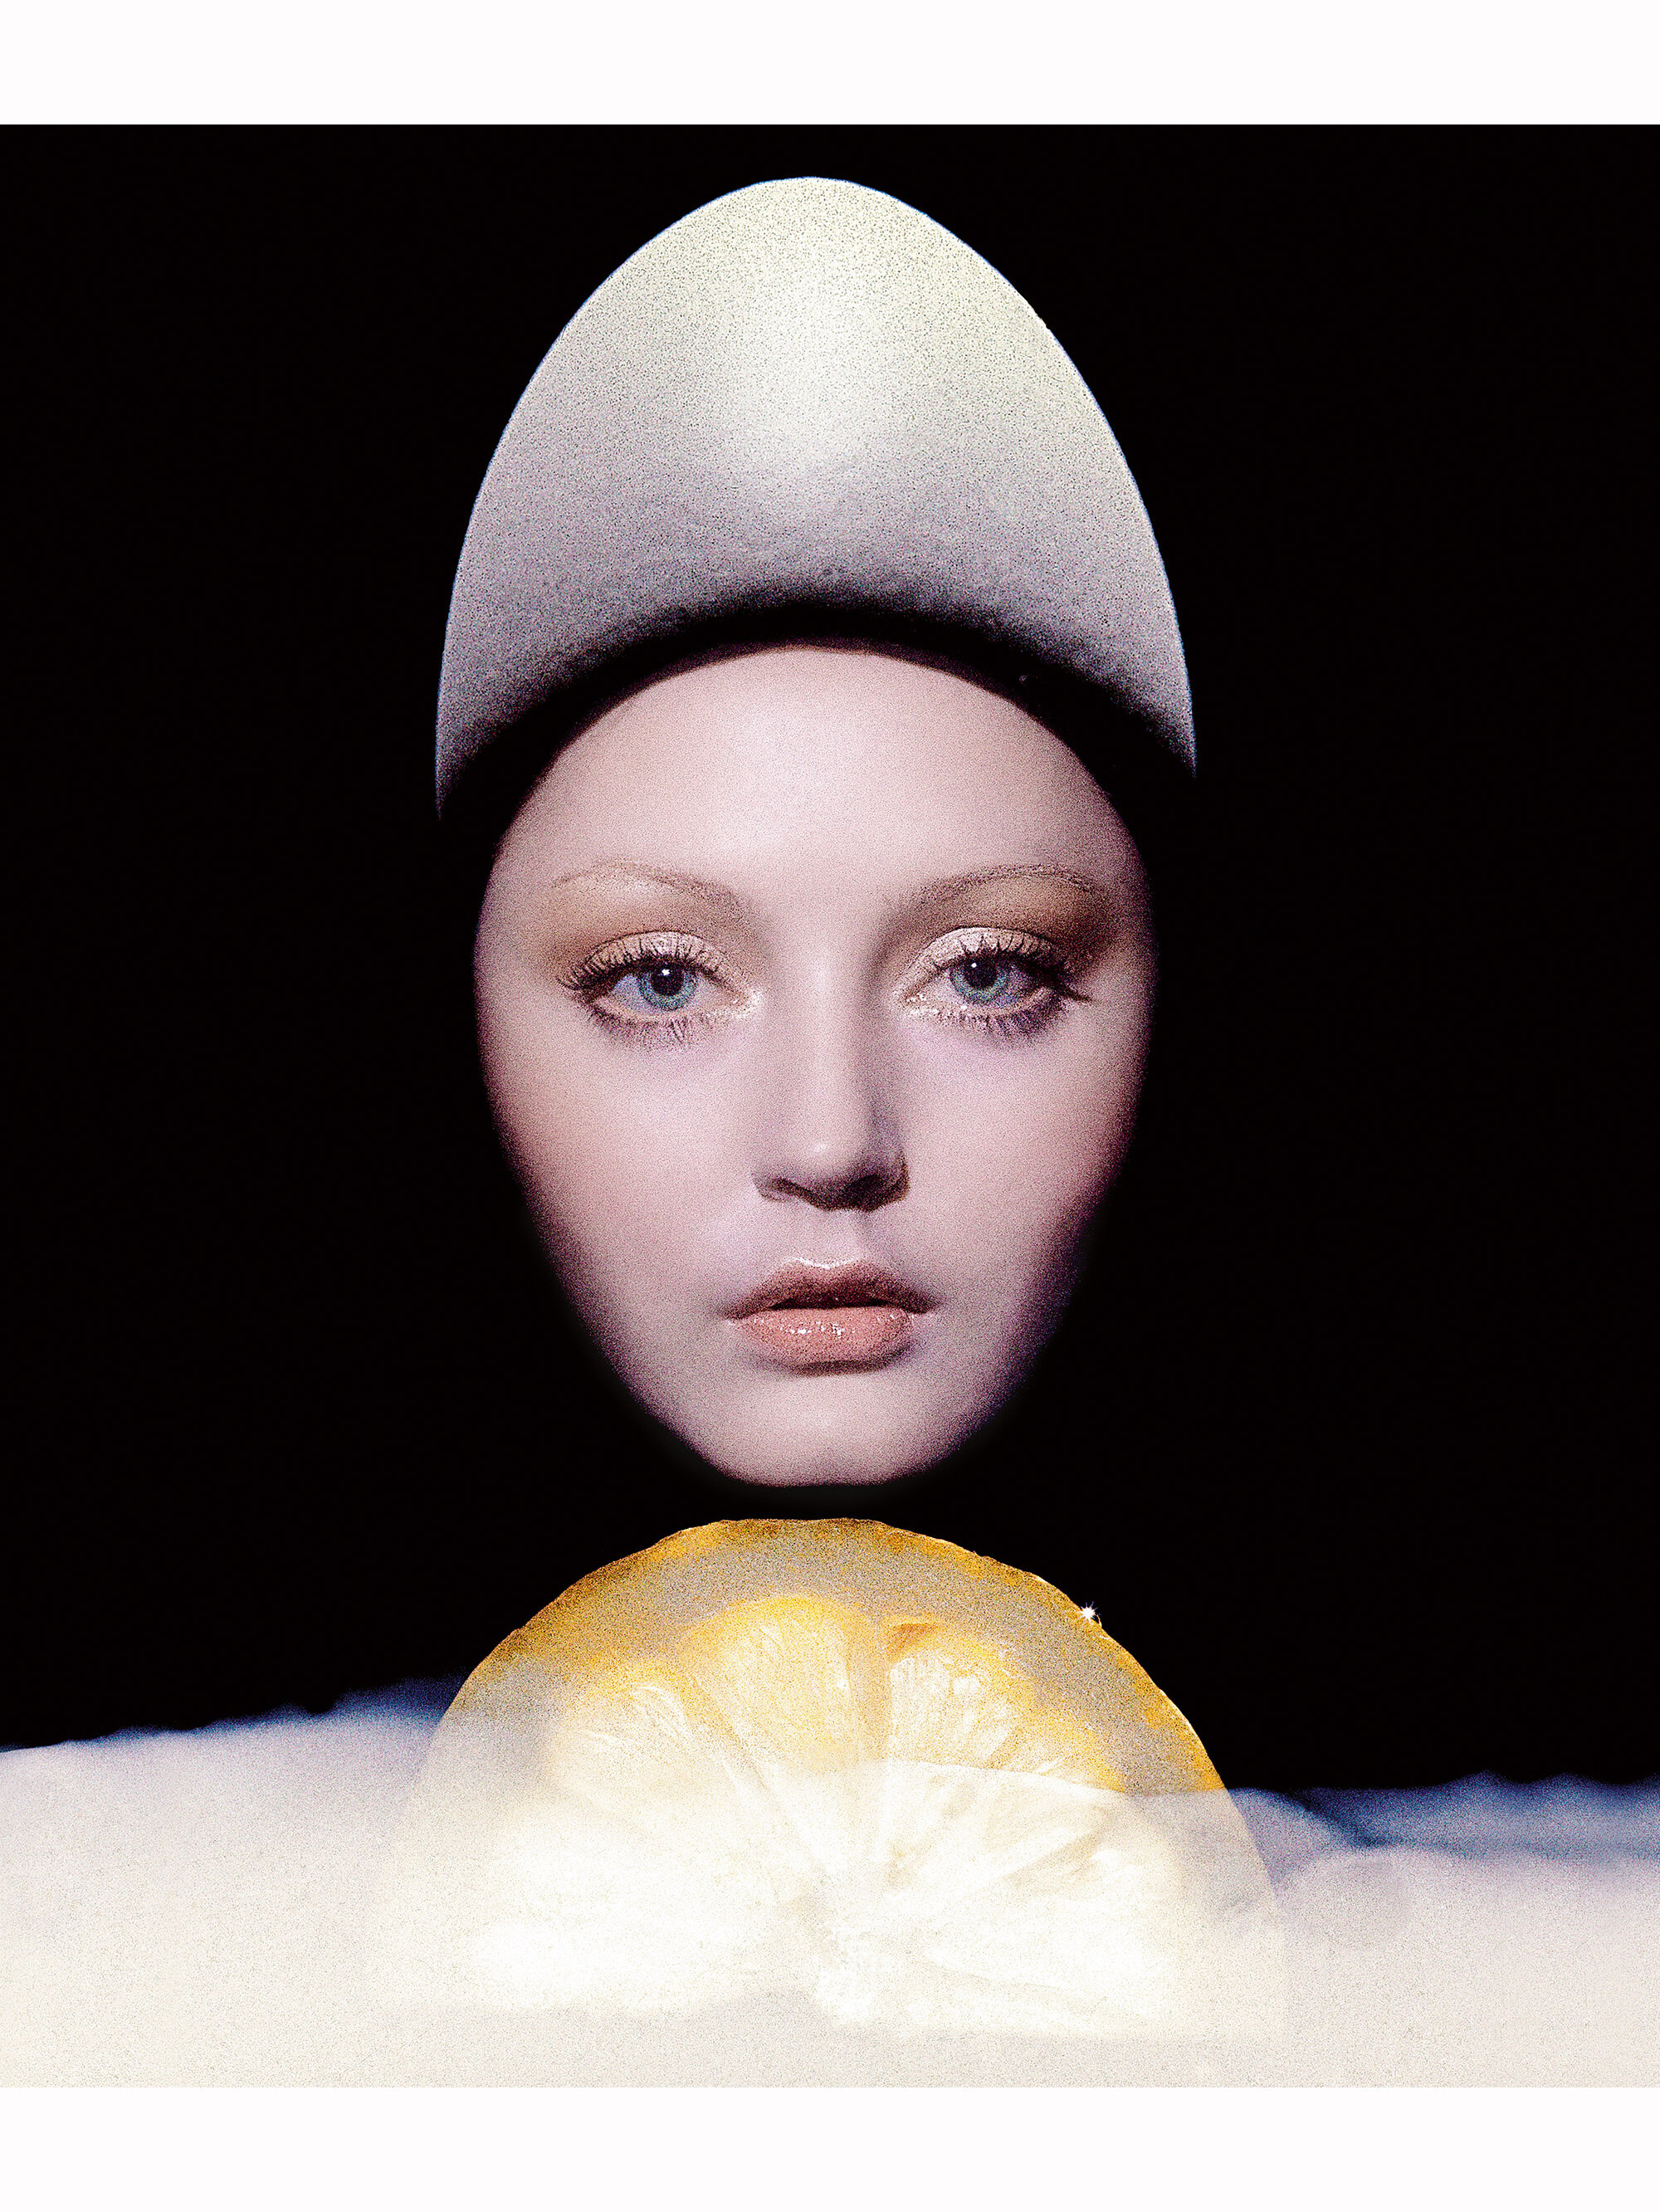 “Beauty Timing” by Clive Arrowsmith for Vogue UK, April 1973.